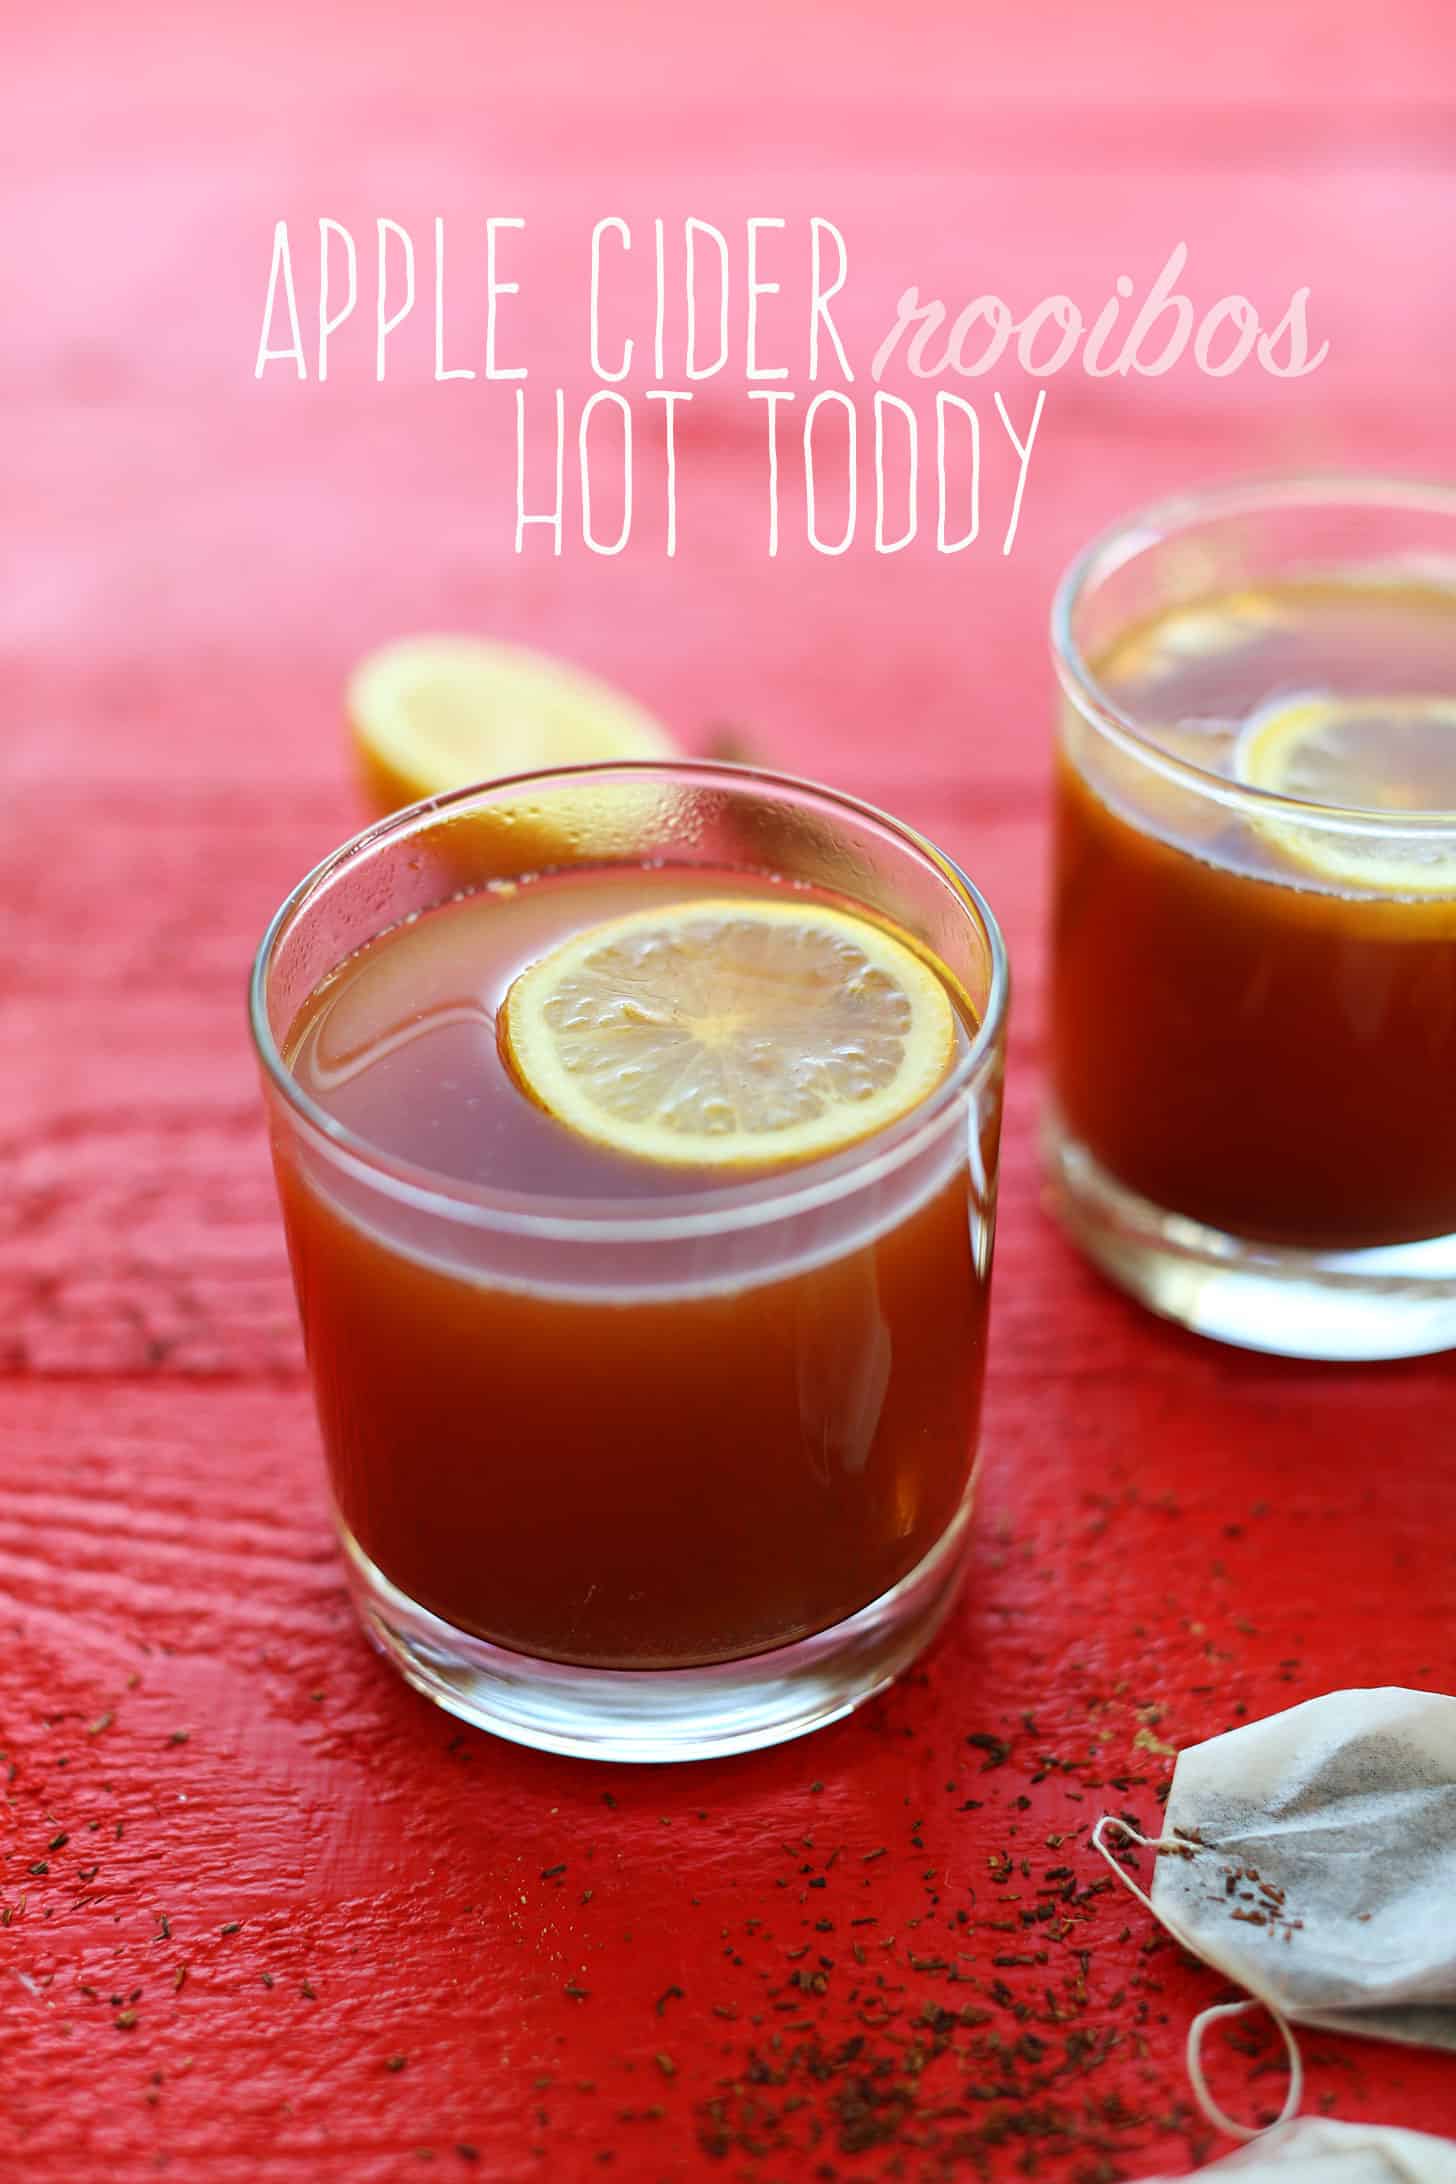 Apple cider rooibos hot toddy